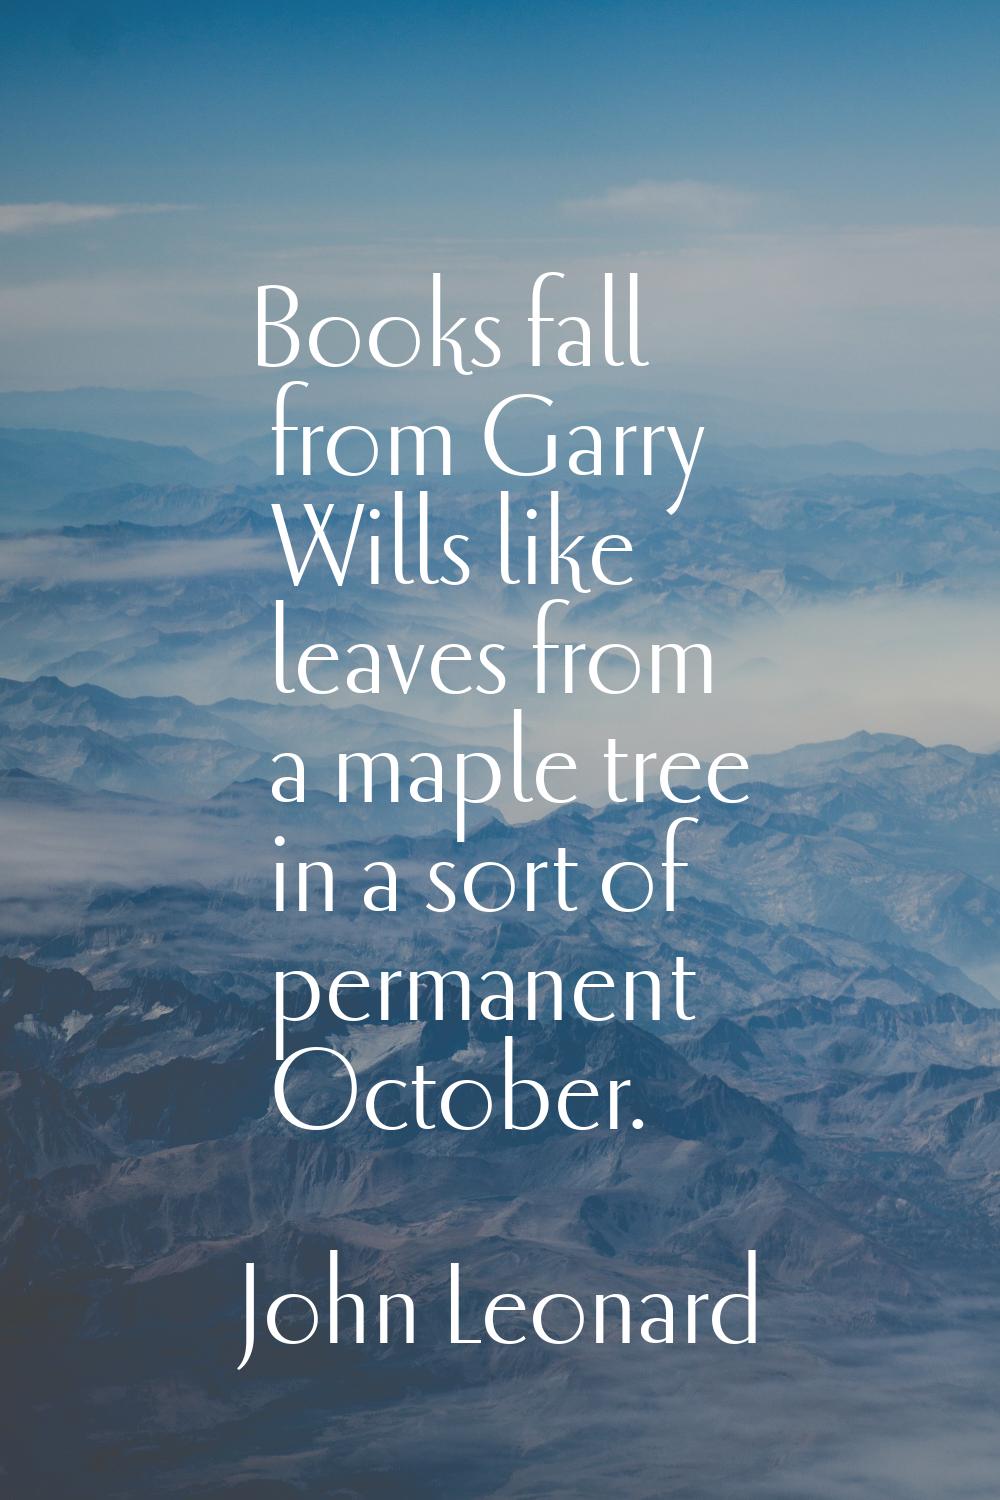 Books fall from Garry Wills like leaves from a maple tree in a sort of permanent October.